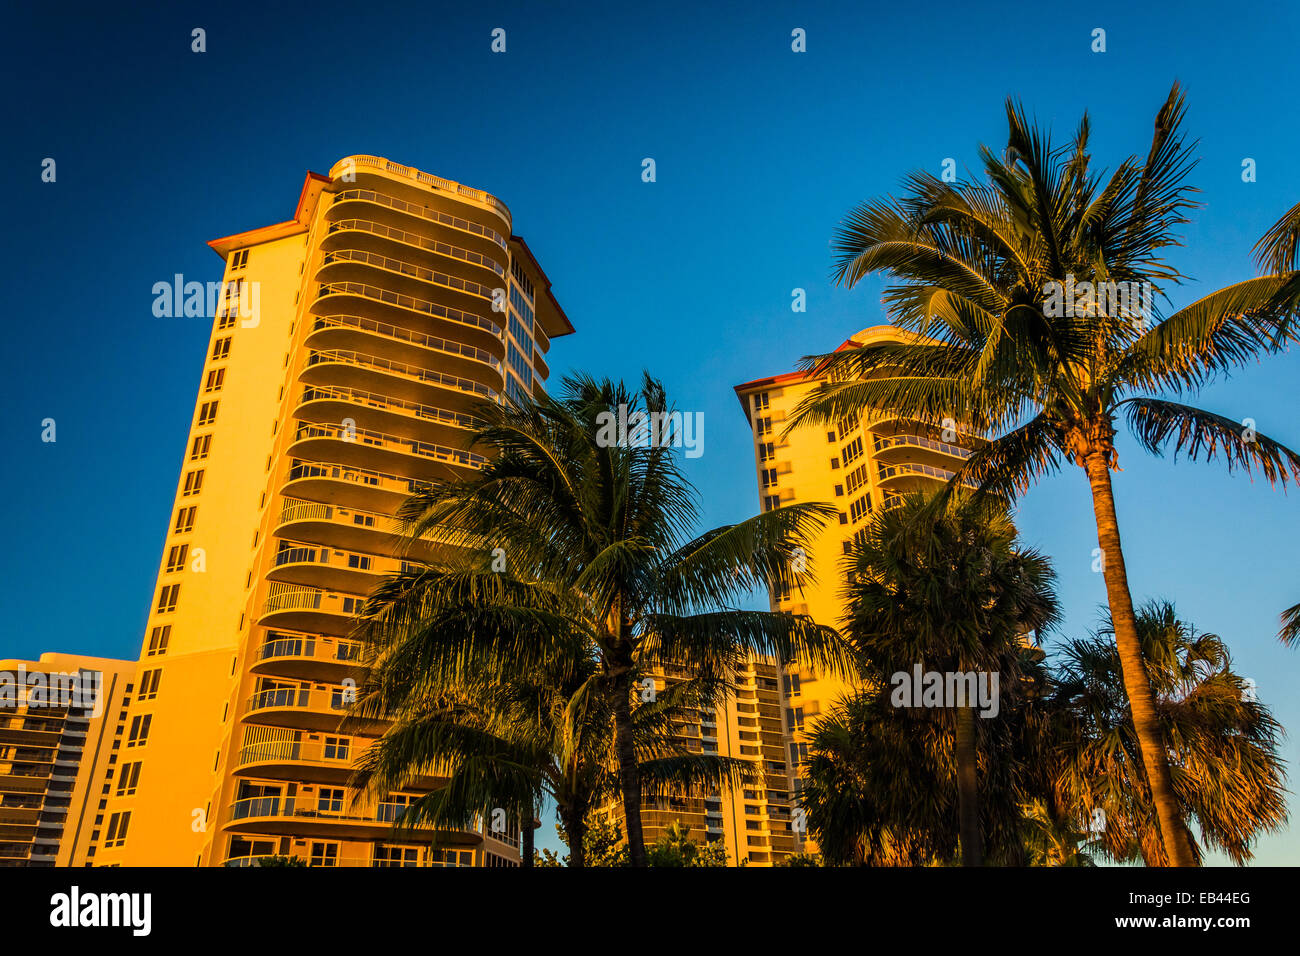 Palm trees and condo towers in Singer Island, Florida. Stock Photo